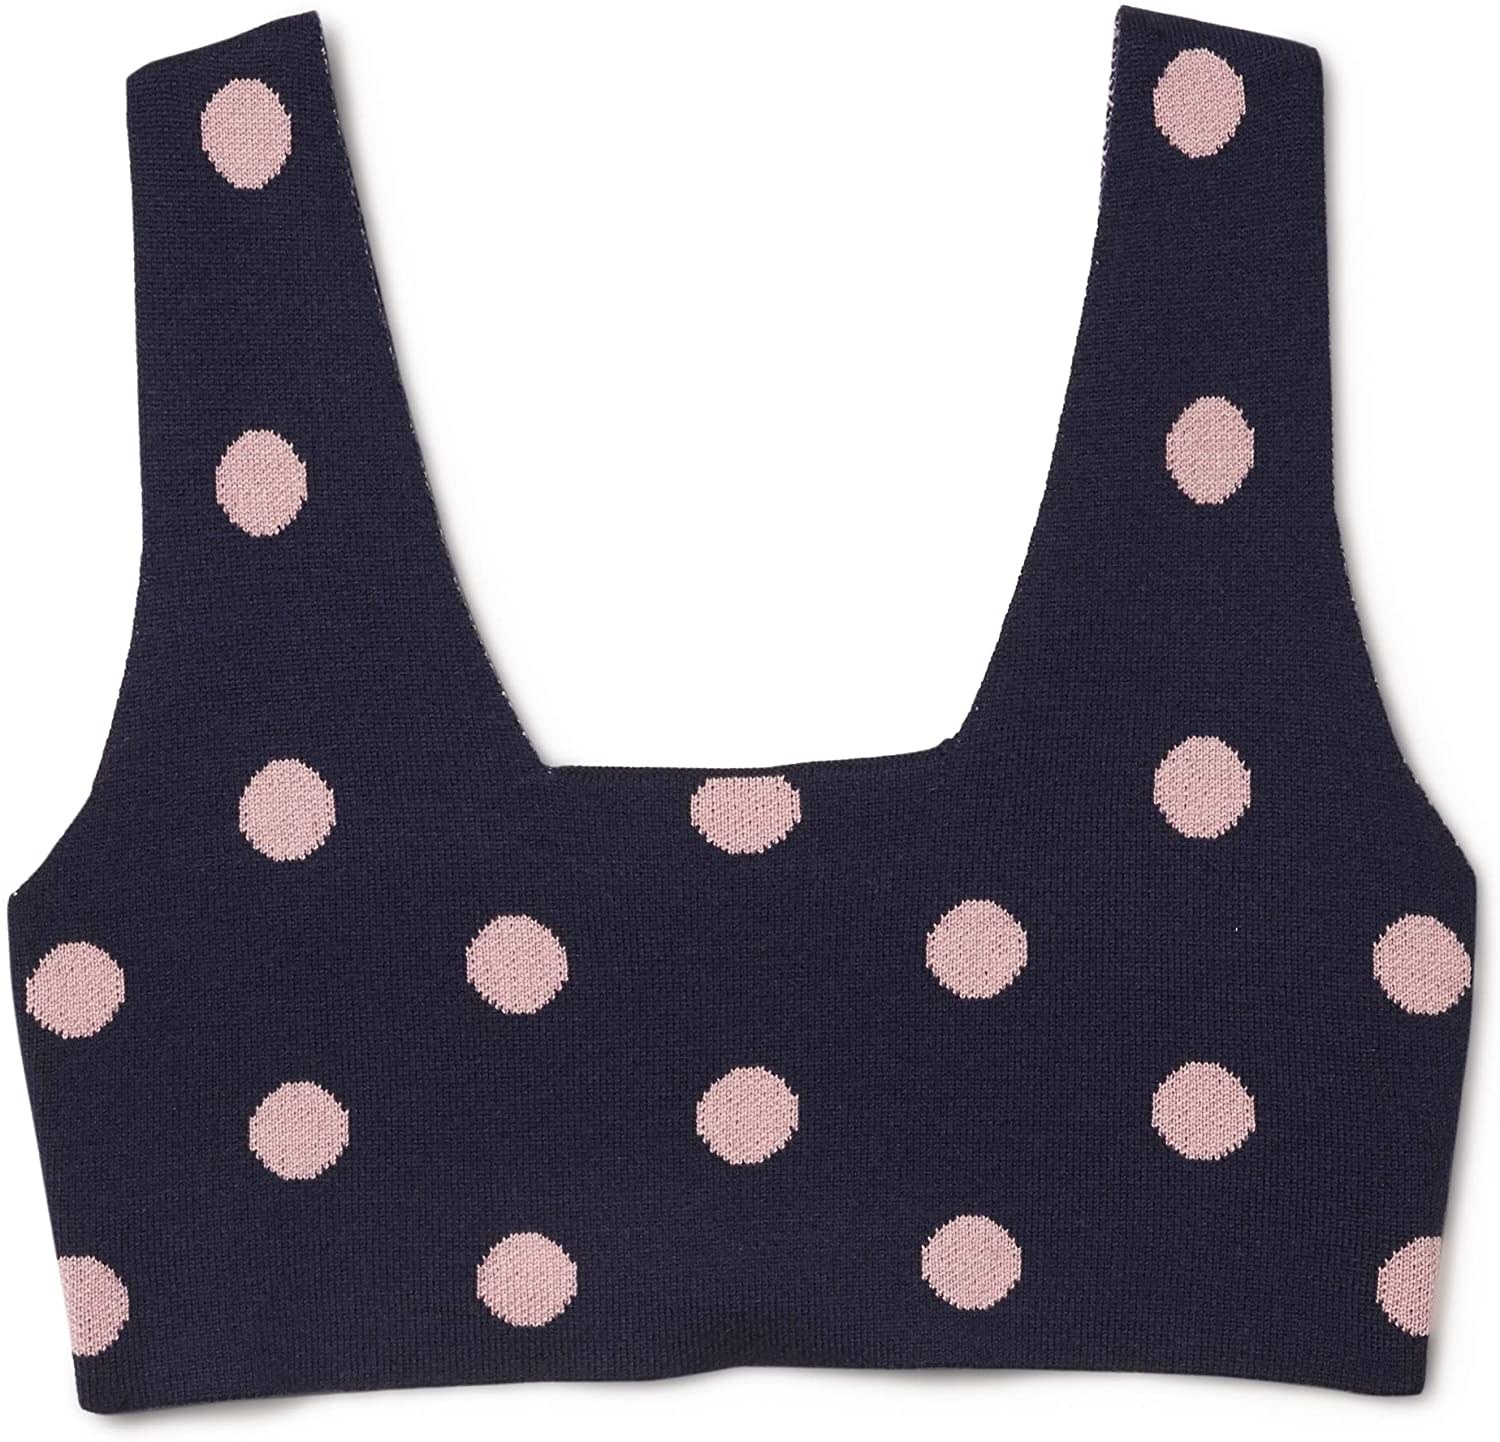 The tank-top style knit bralette in navy with light pink polka dots